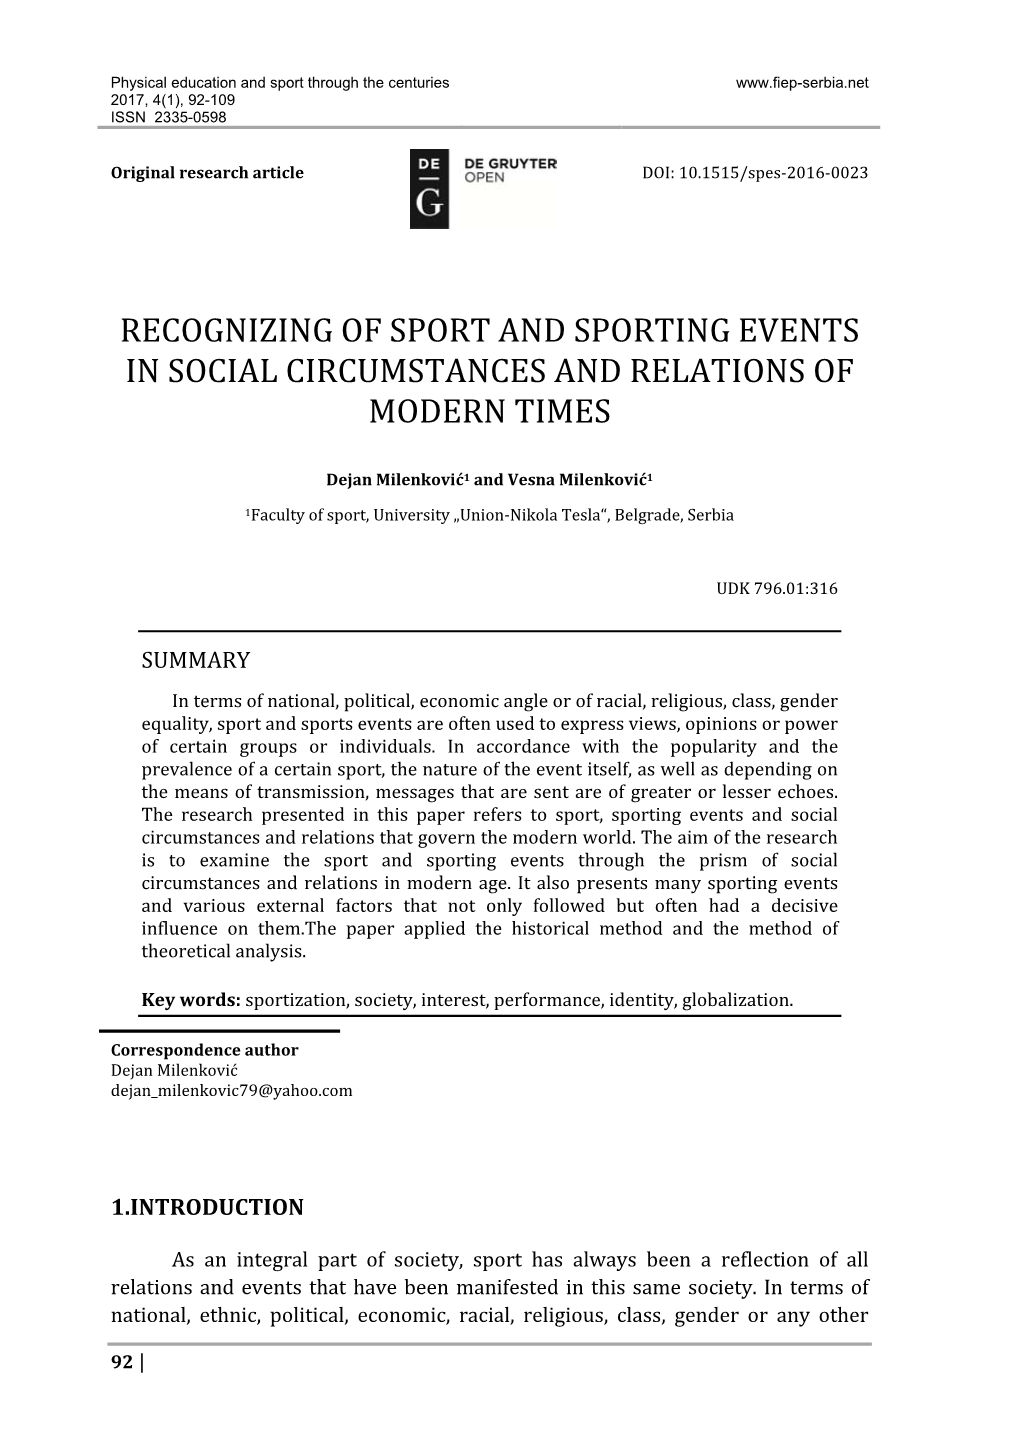 Recognizing of Sport and Sporting Events in Social Circumstances and Relations of Modern Times